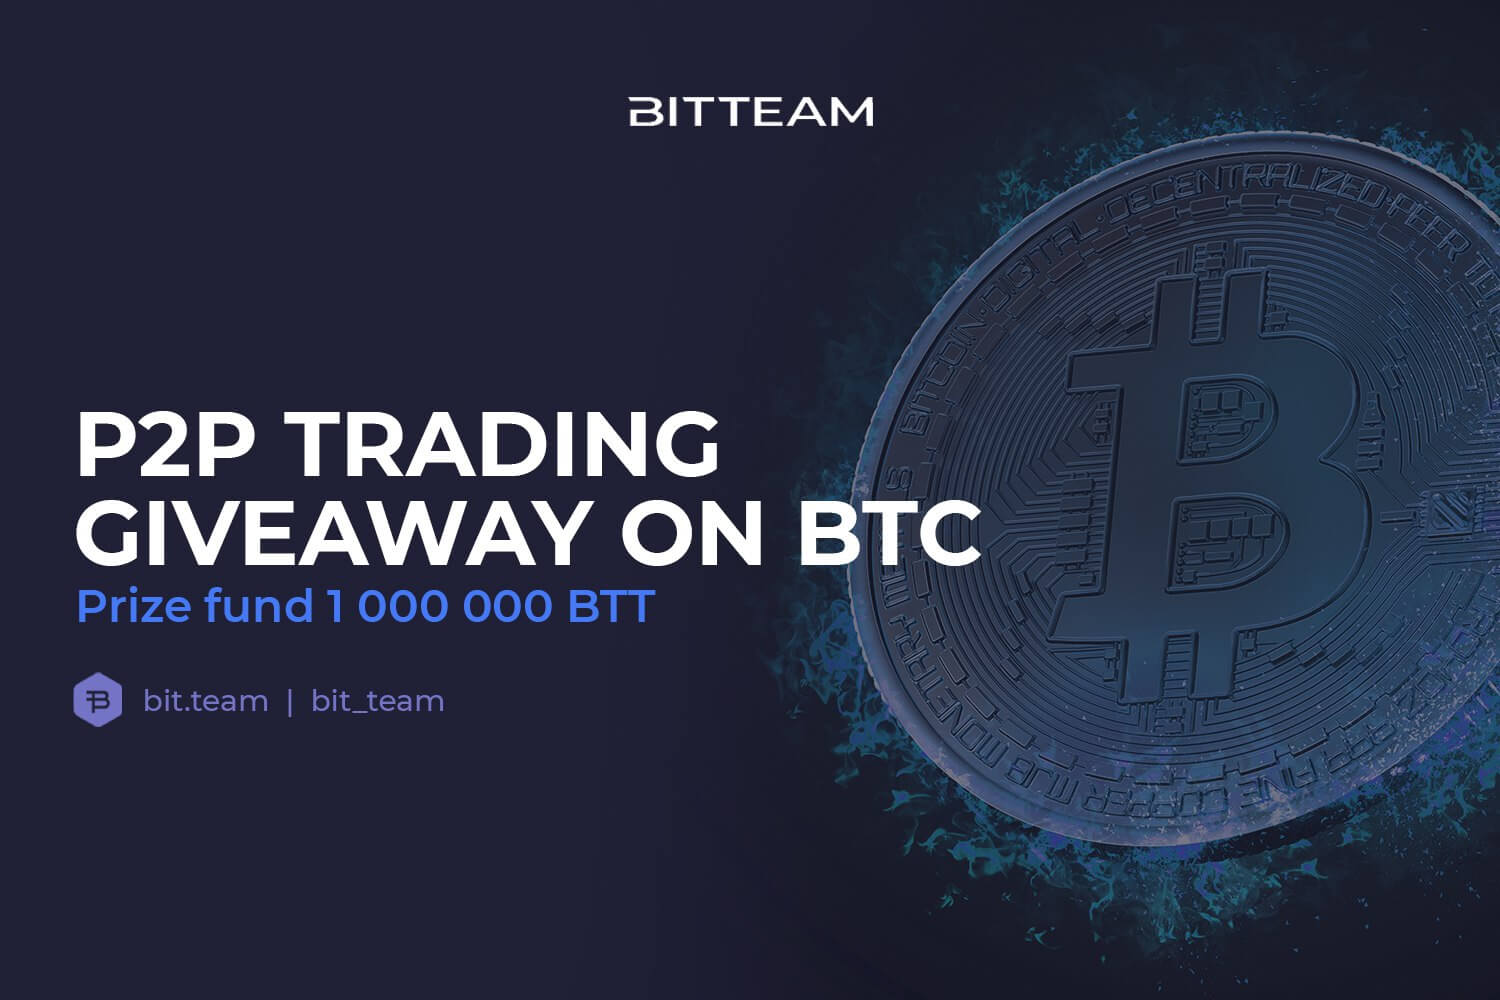 The trading contest on p2p.bit.team is at the finish stage to the end and only 9 days left till the